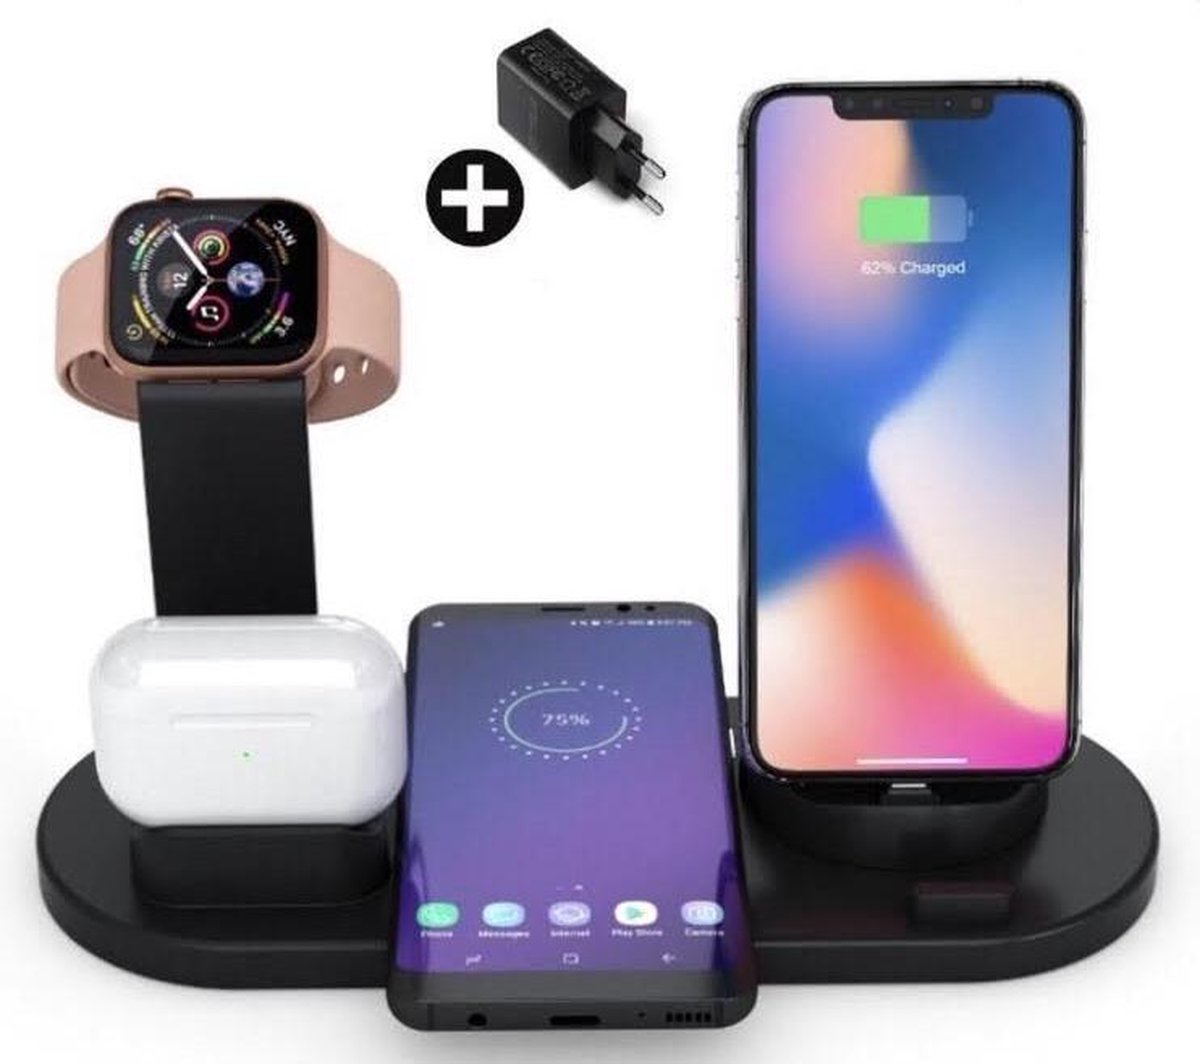 J.A.G. Chargers® 4-in-1 Draadloze oplader Iphone – Inclusief snellader- Wireless charger for iPhone, iWatch en AirpodsPro - Oplaadstation Apple - Kerst - Snellader iphone - Zwart- Docking station - Sinterklaas